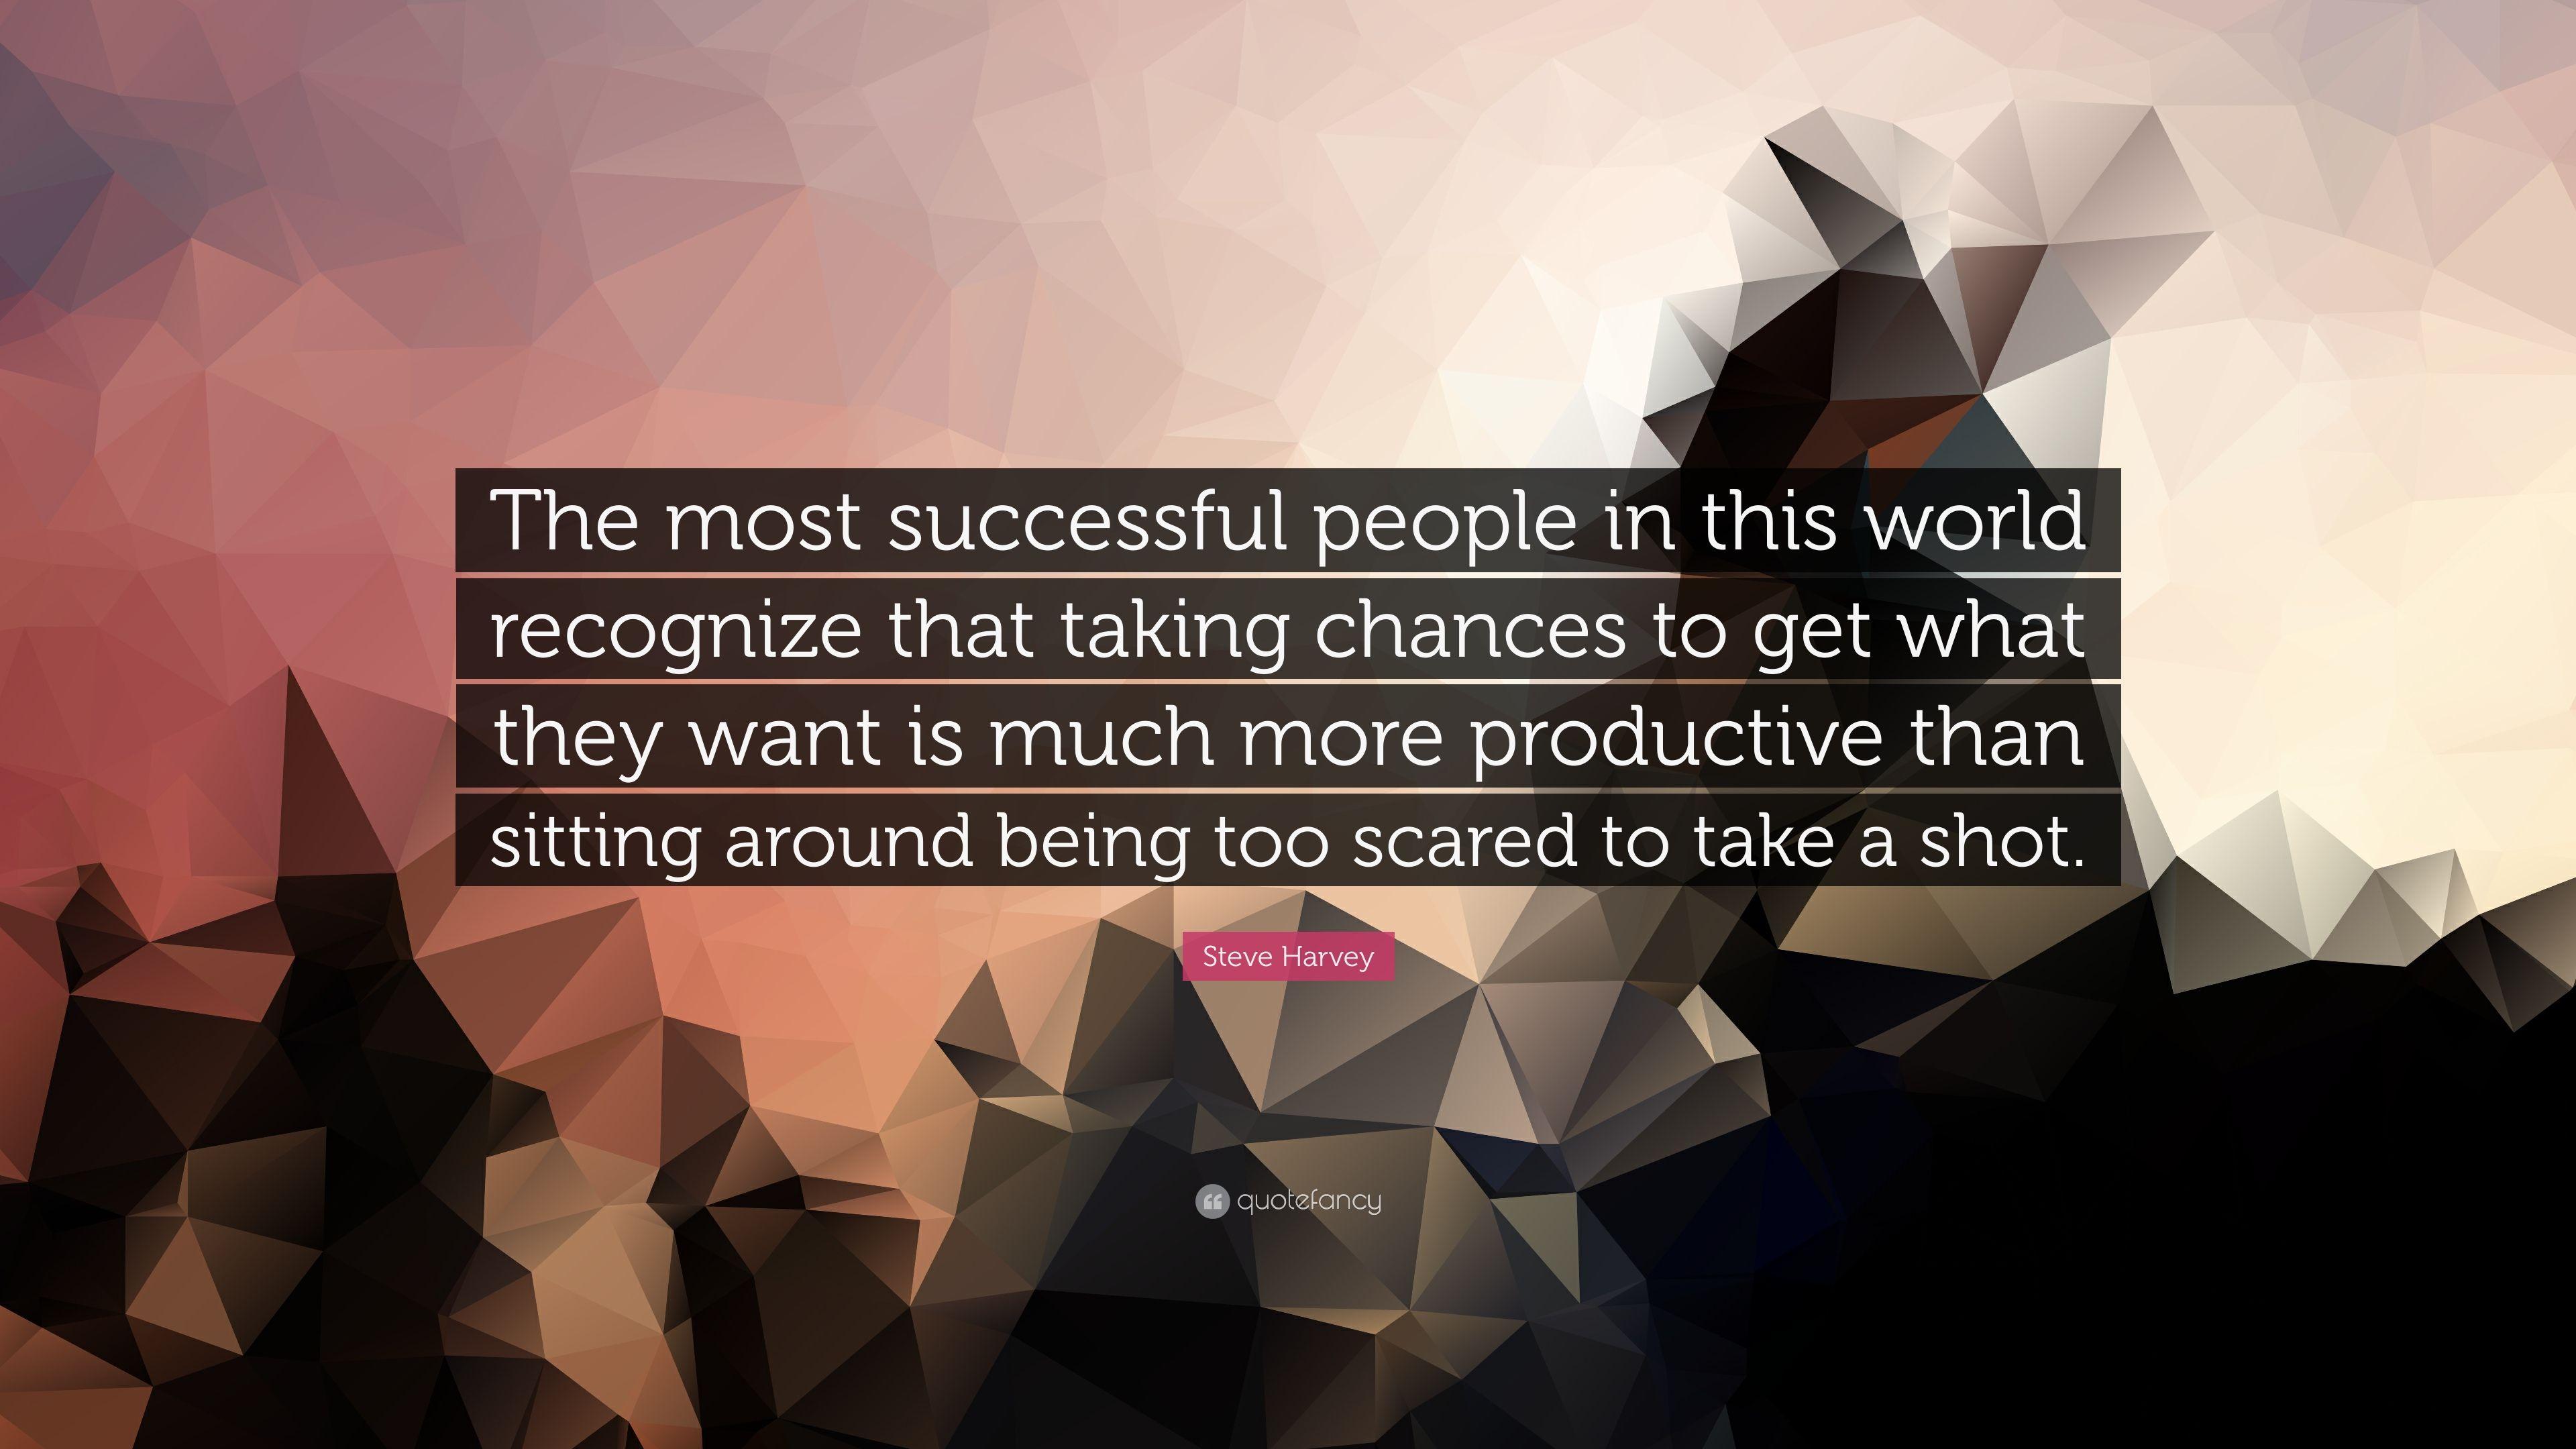 Steve Harvey Quote: “The most successful people in this world